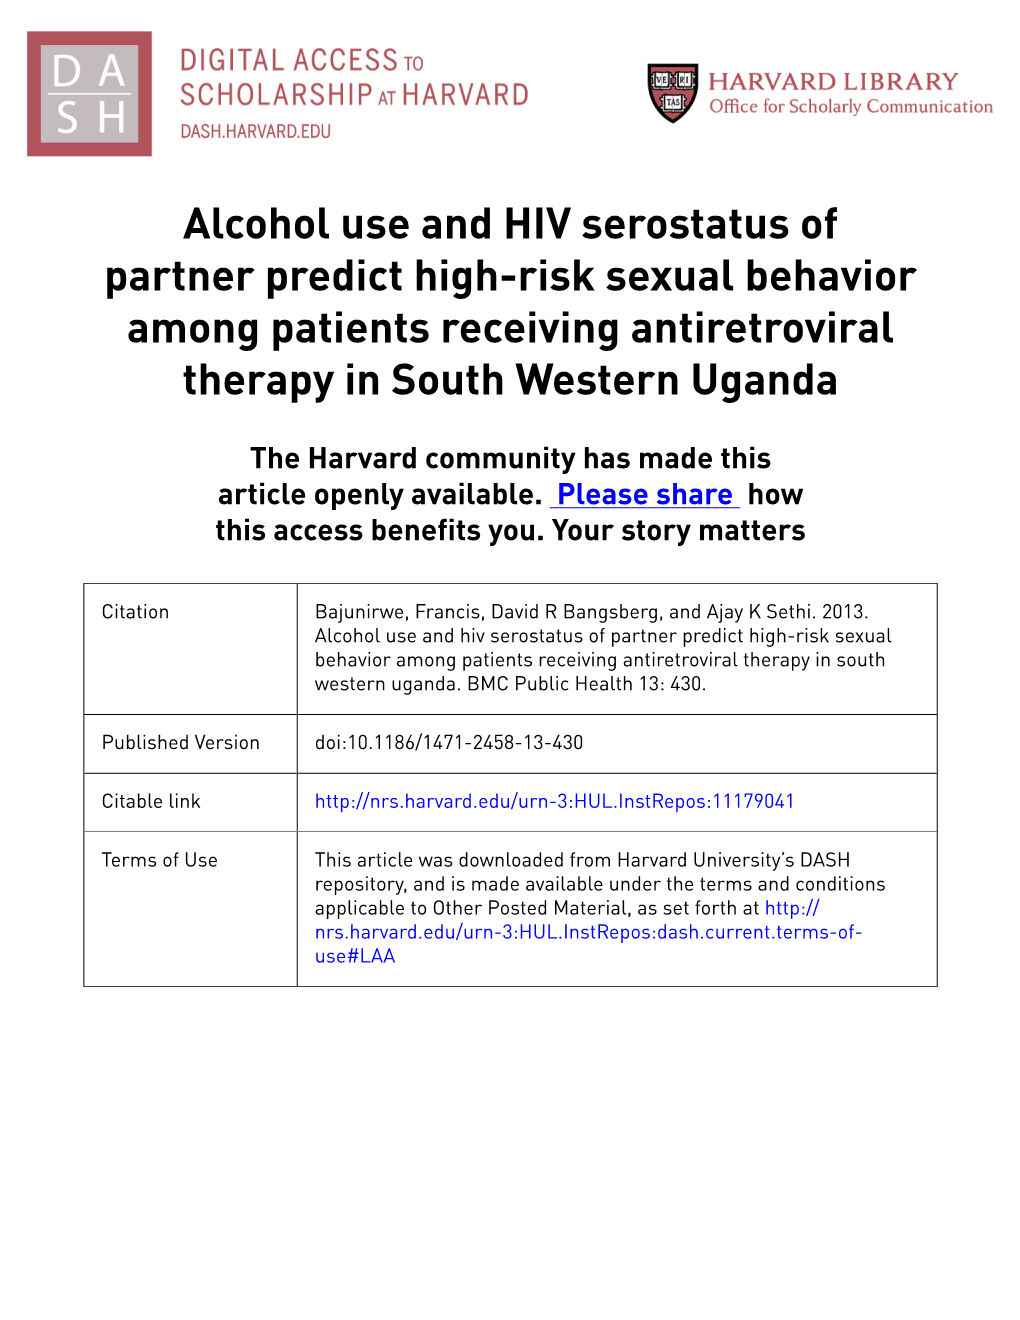 Alcohol Use and HIV Serostatus of Partner Predict High-Risk Sexual Behavior Among Patients Receiving Antiretroviral Therapy in South Western Uganda